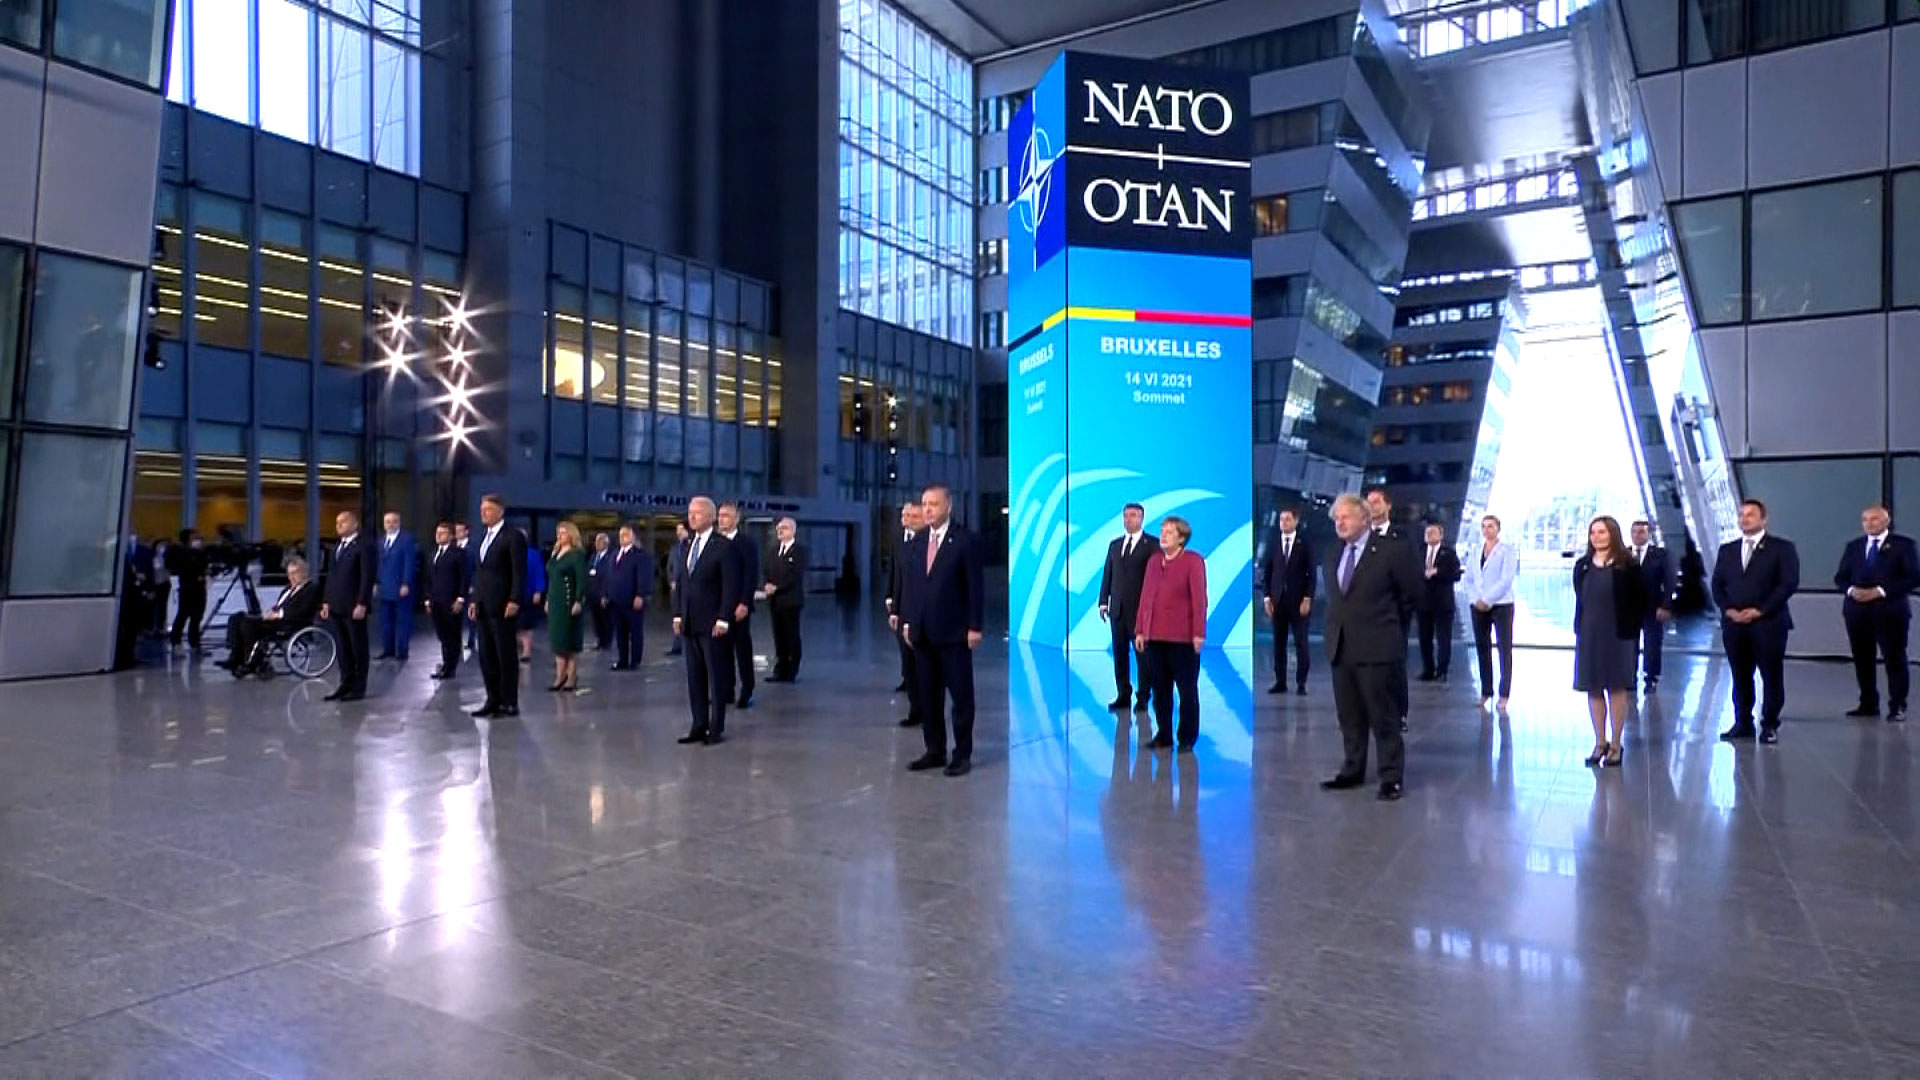 NATO members gather for a photo in Brussels, Belgium, on June 14.